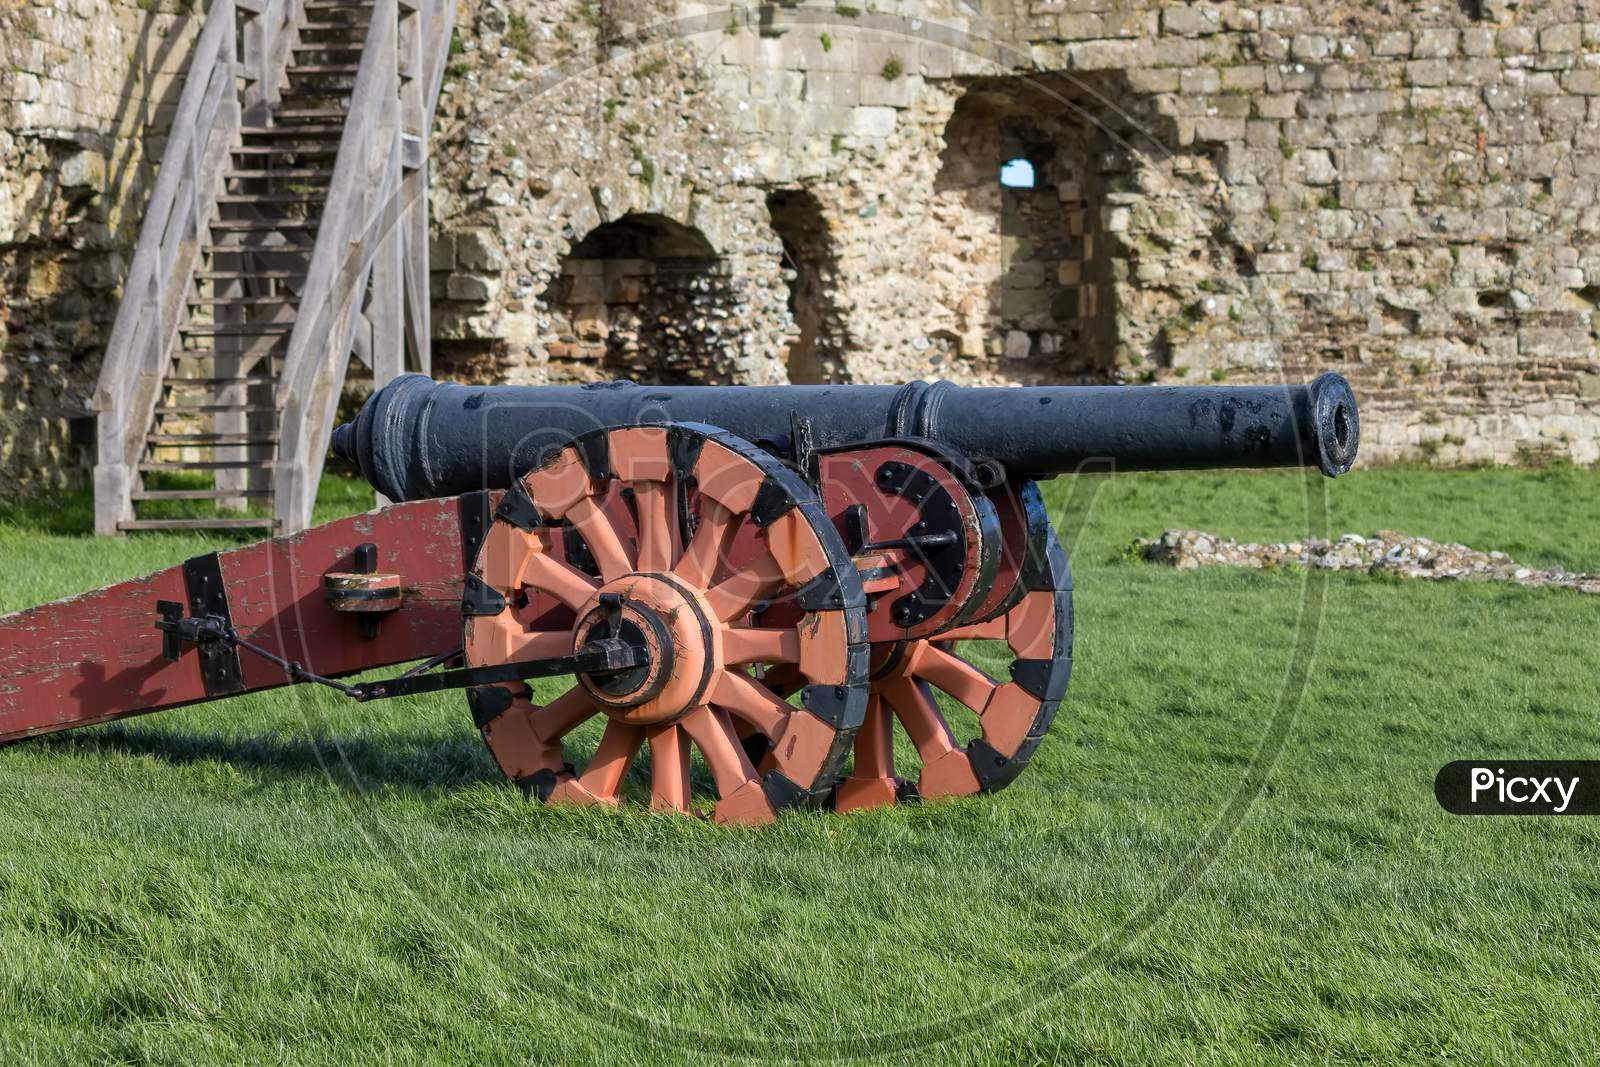 Pevensey, East Sussex/Uk - March 1 : Elizabethan Cannon In The Derelict Castle In Pevensey East Sussex On March 1, 2020